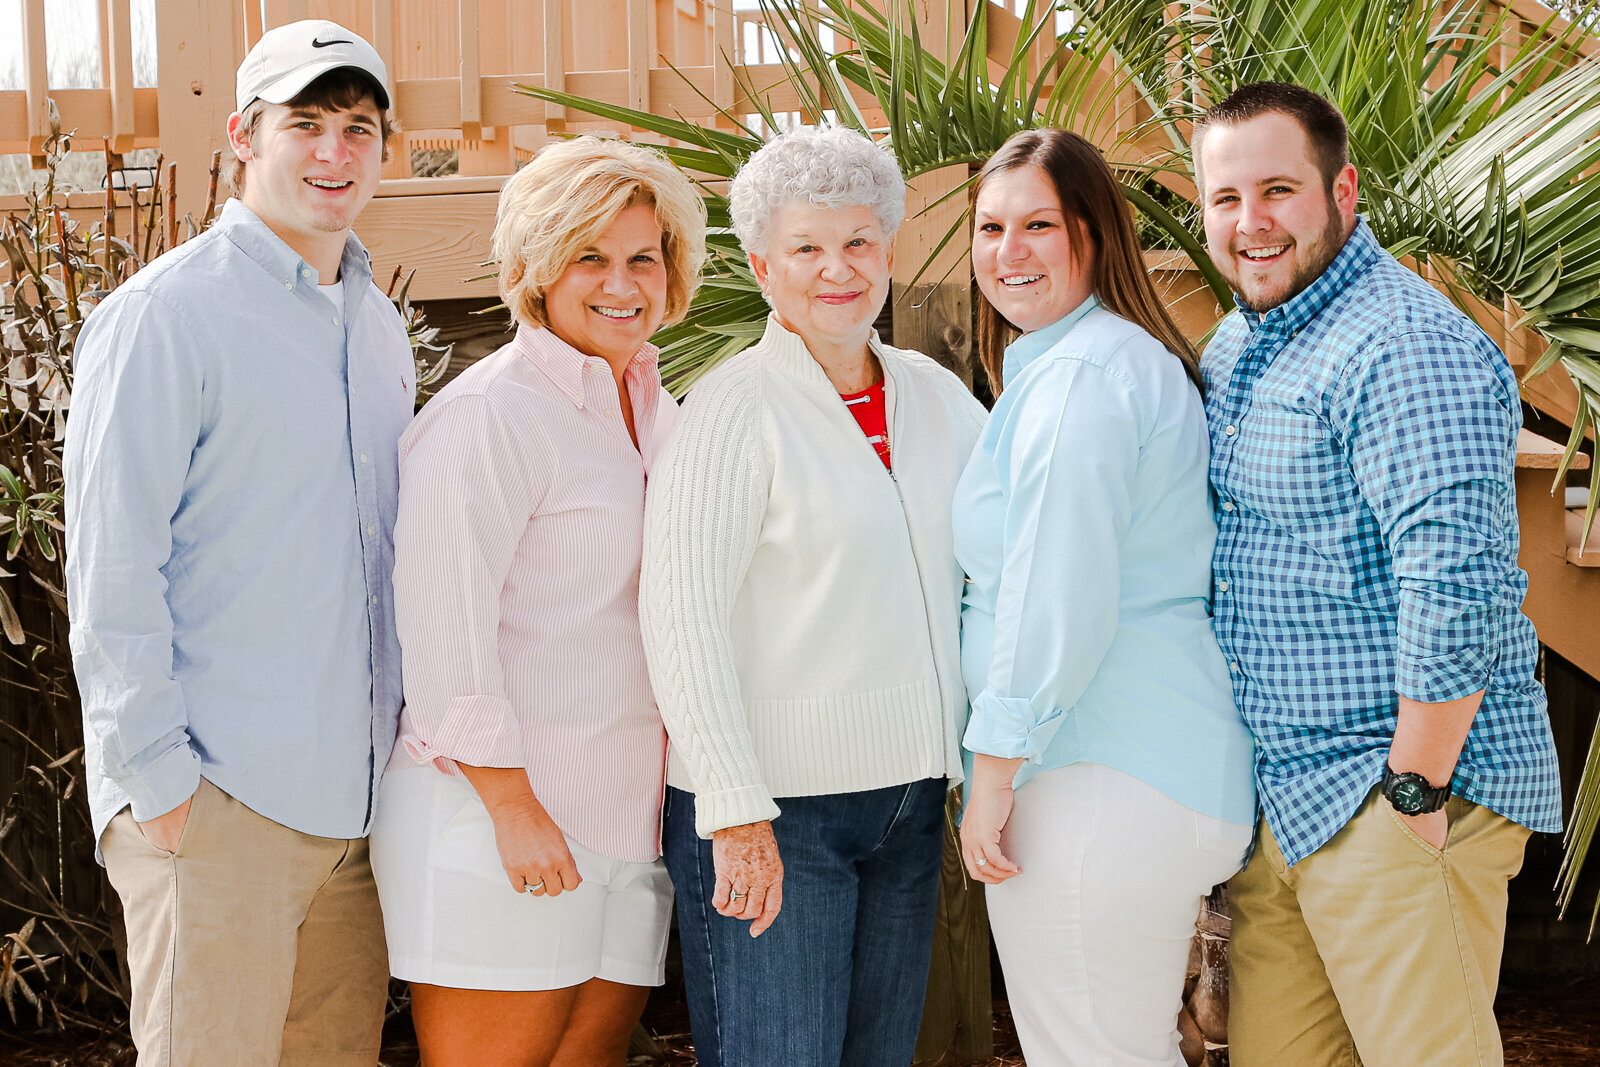 Annual family photos for three generations with Ron Schroll Photography at Ocean Isle Beach, NC